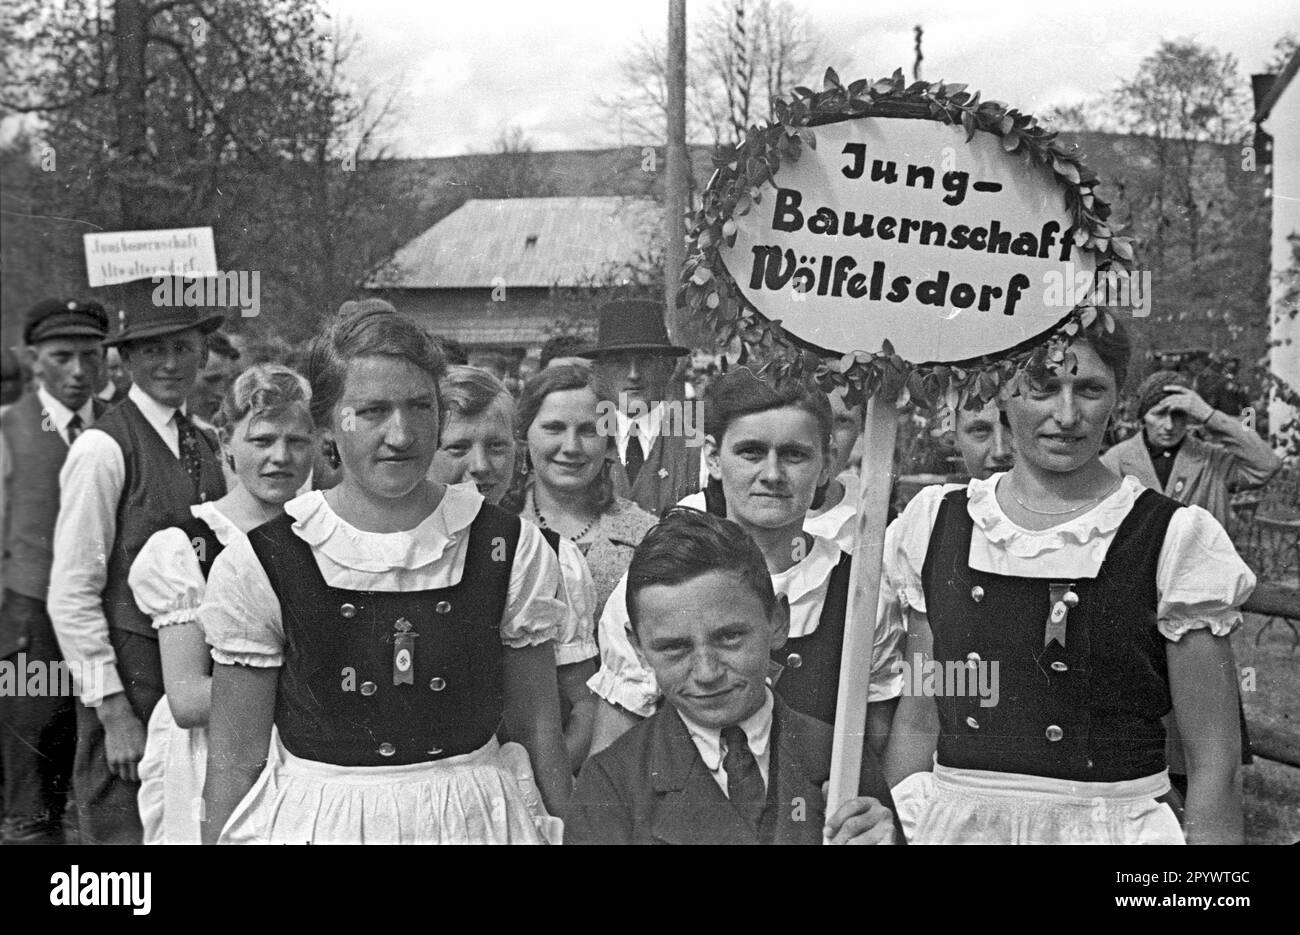 'Young people of the ''Jung - Bauernschaft Woelfelsdorf'' at a national costume festival. Today's Wilkanow is located in Lower Silesia.' Stock Photo